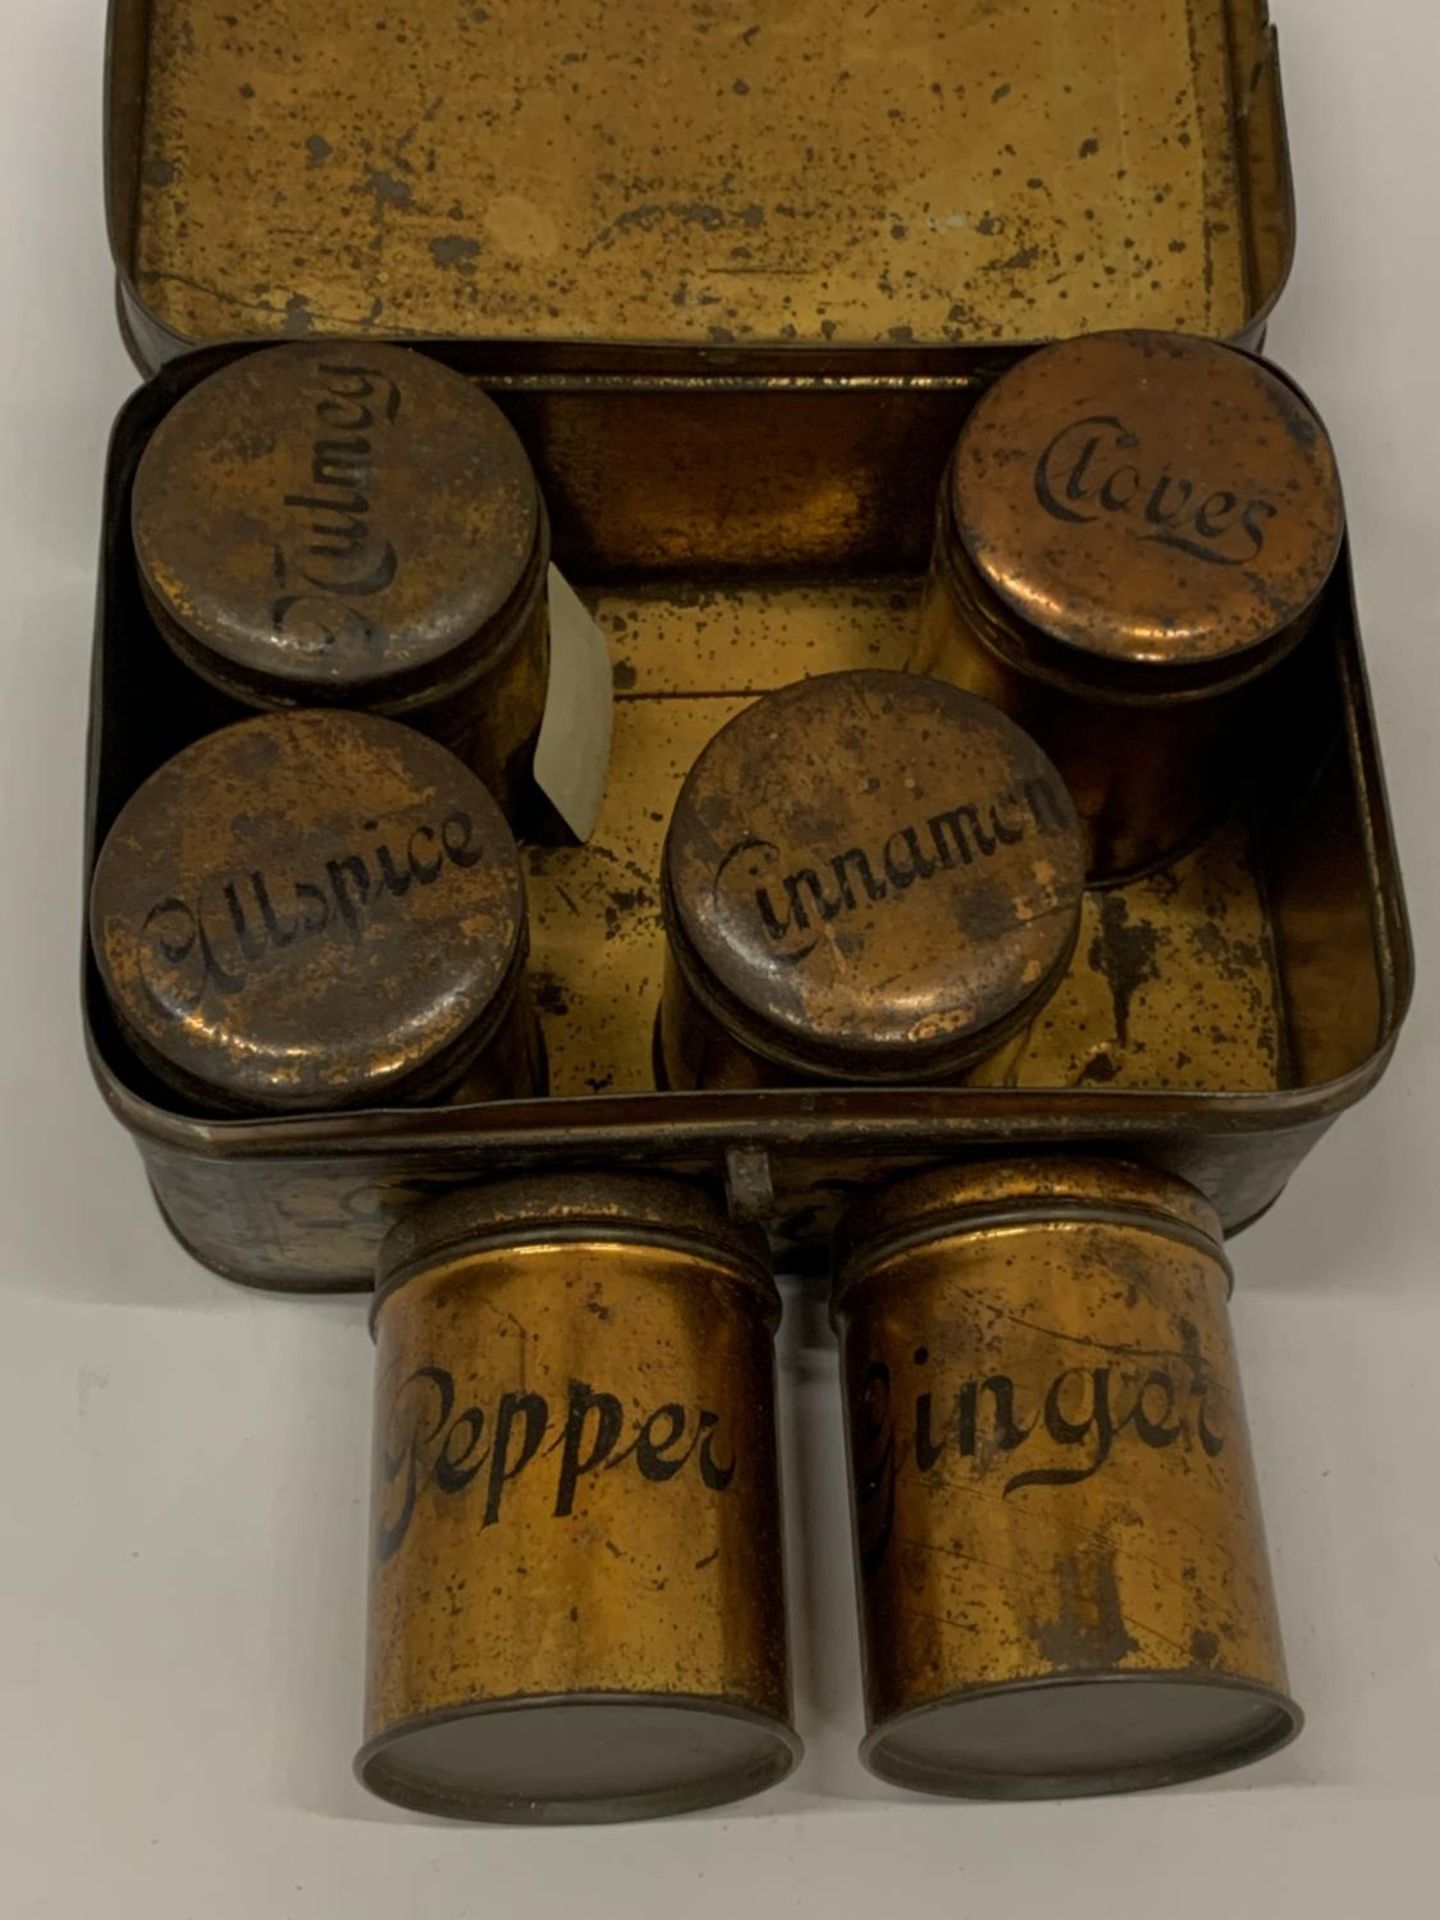 A VINTAGE 1940'S TIN METAL SPICE CHEST WITH SIX INNER LIDDED SPICE CONTAINERS - Image 4 of 6